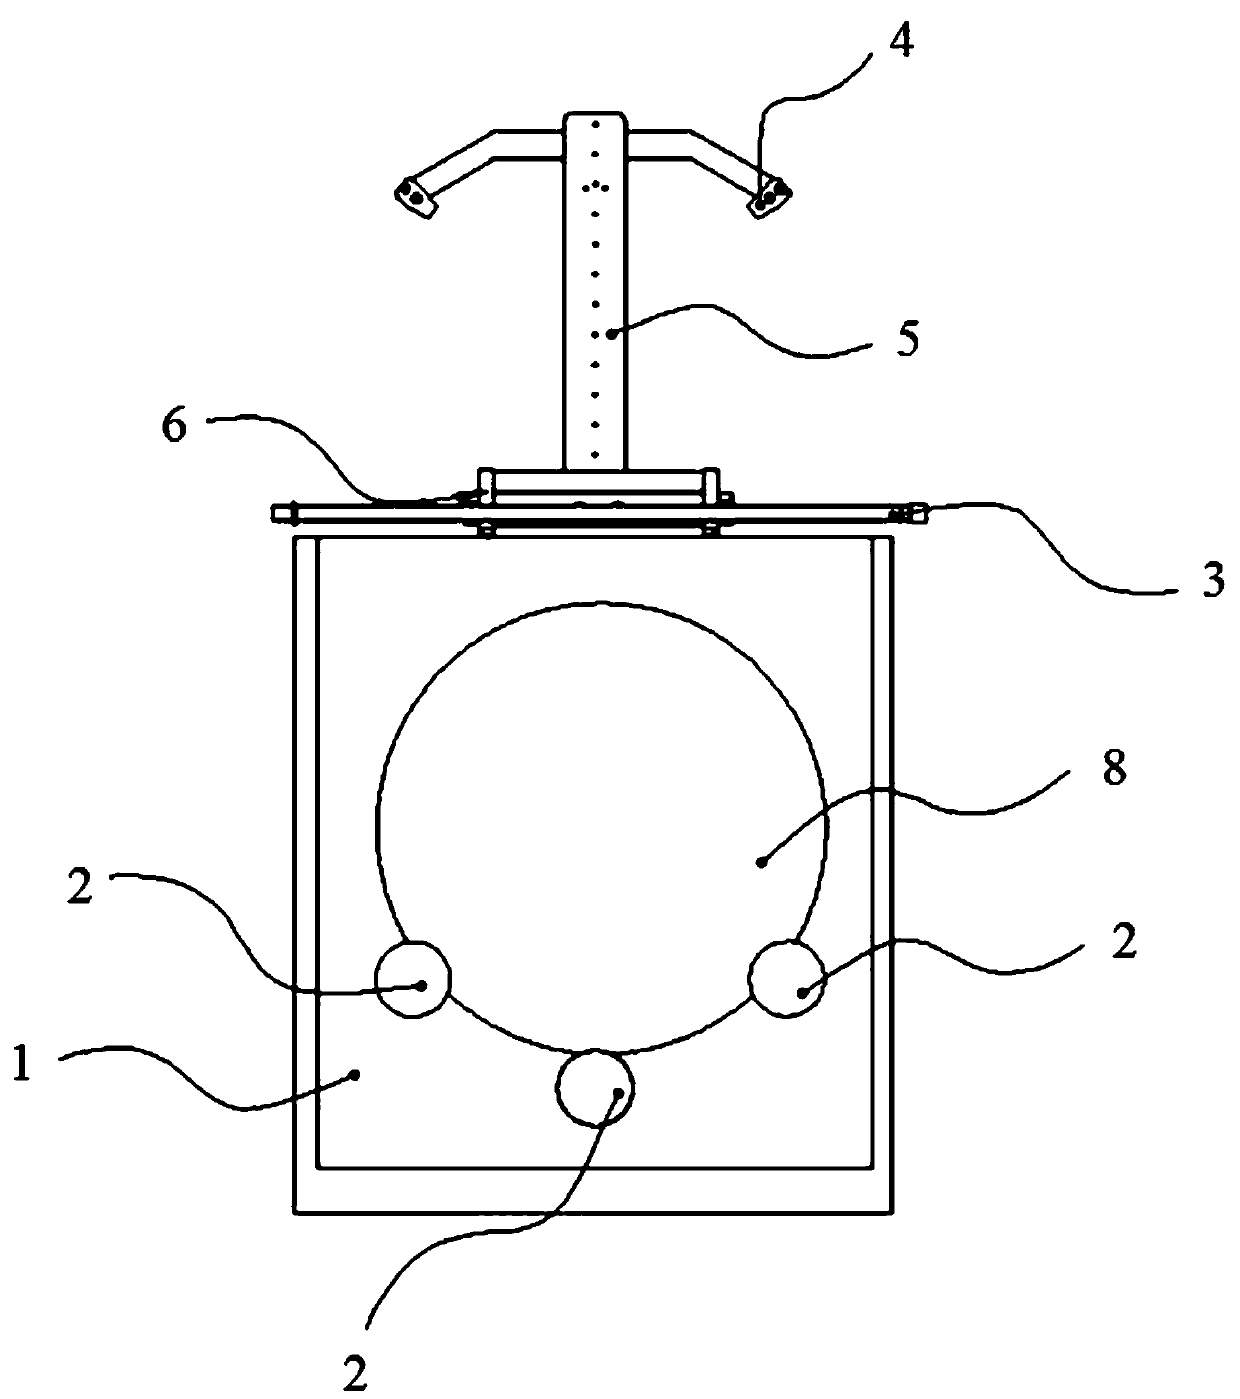 Wafer cleaning and drying device